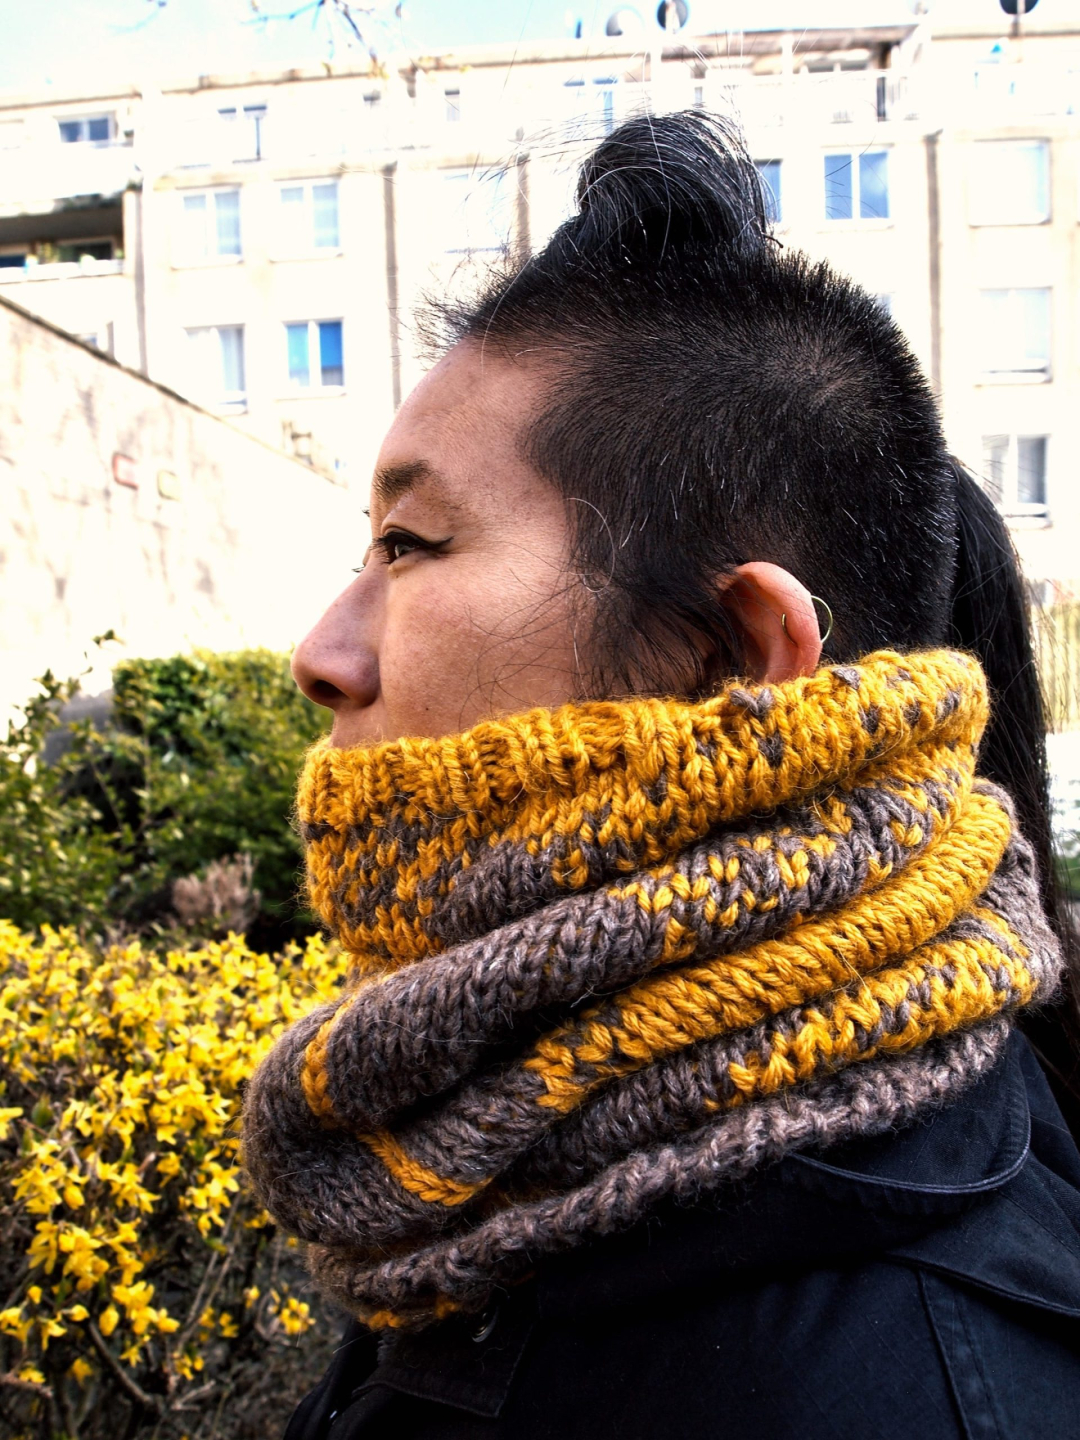 Cellular Automata cowl: a snuggly 2-strand colorwork cowl worked in the round with no seams